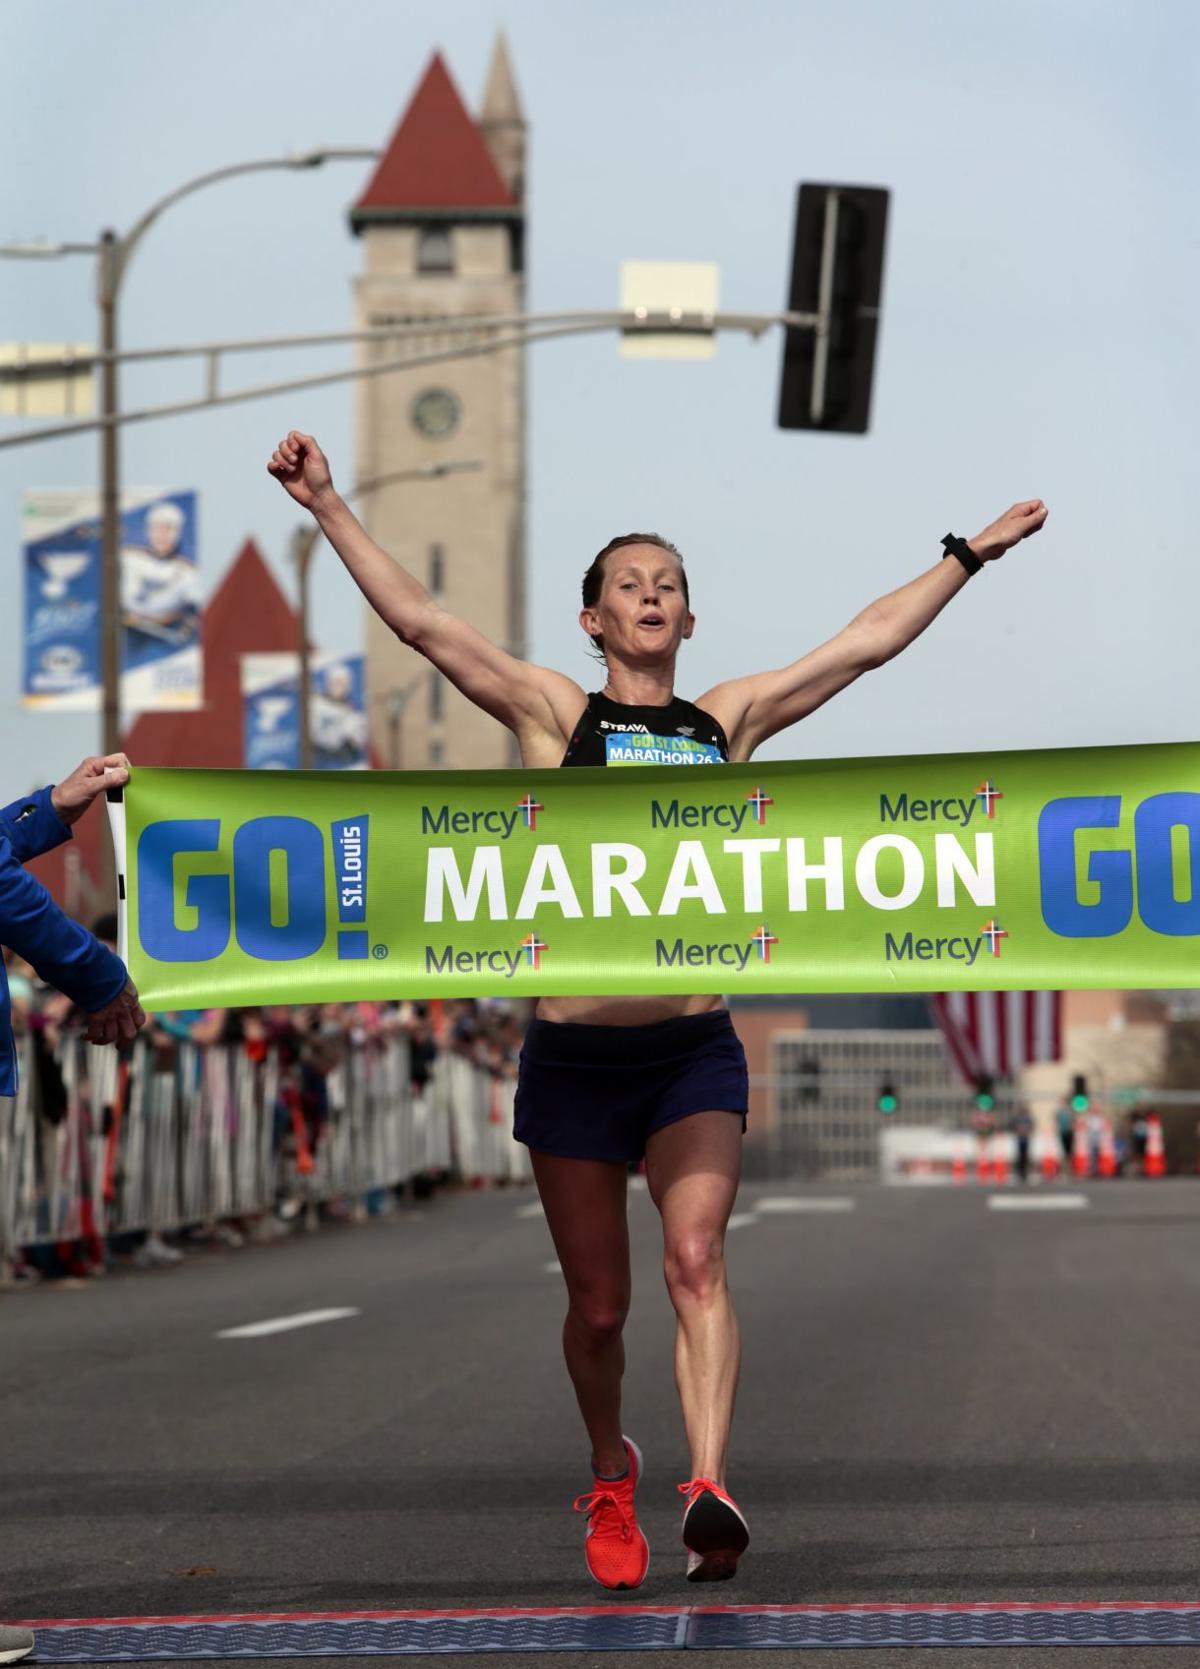 On a warm day for runners, two newcomers win at Go! St. Louis Marathon | Sports | www.paulmartinsmith.com